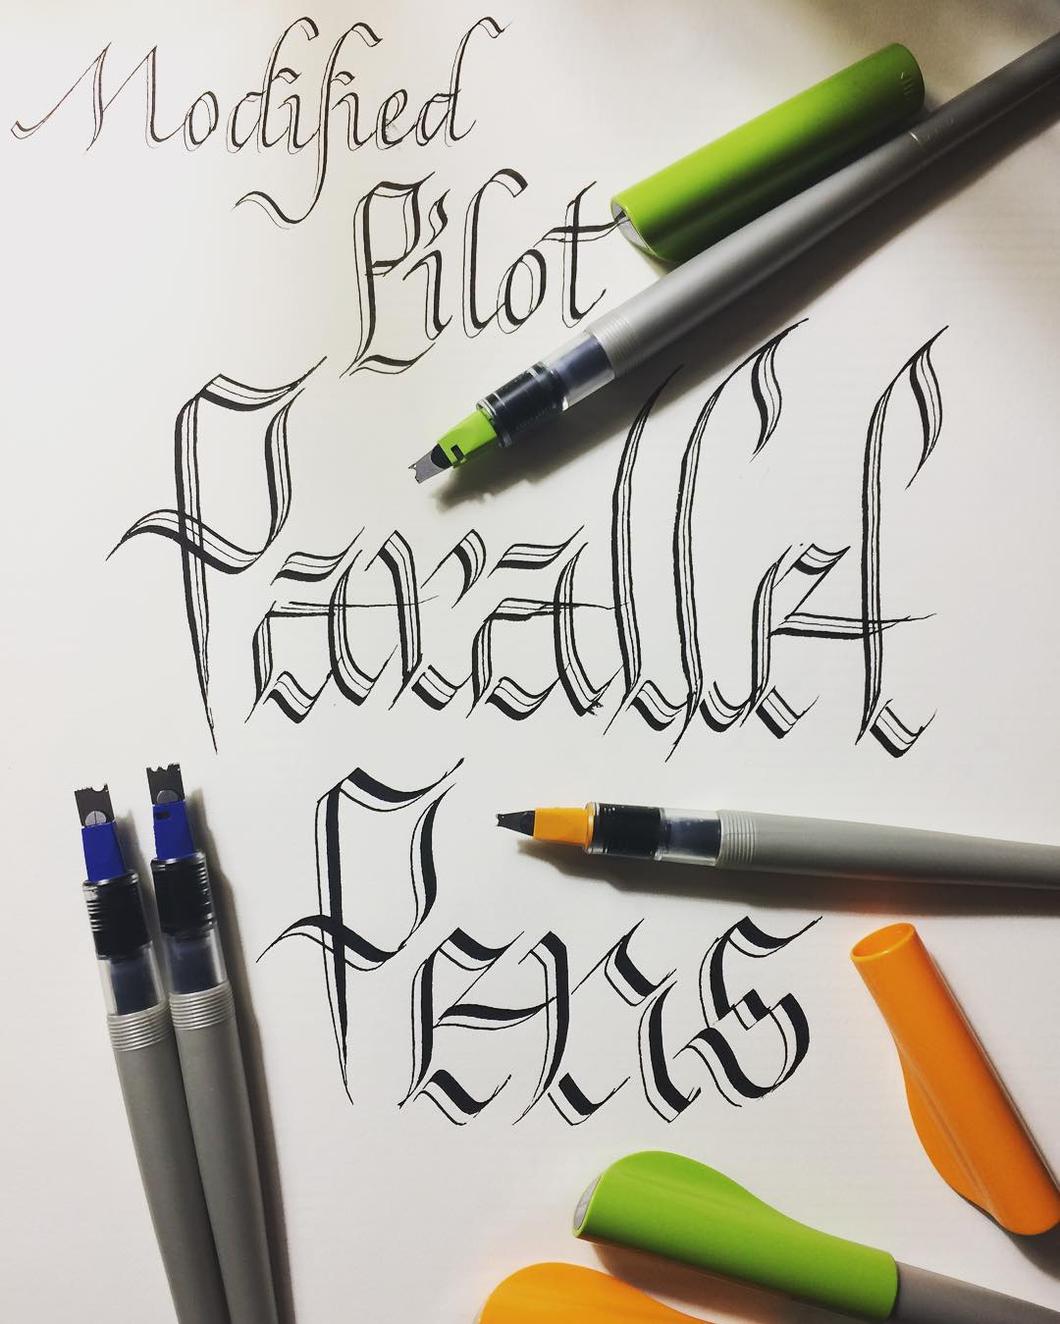 Pilot Parallel Pens - how to use 